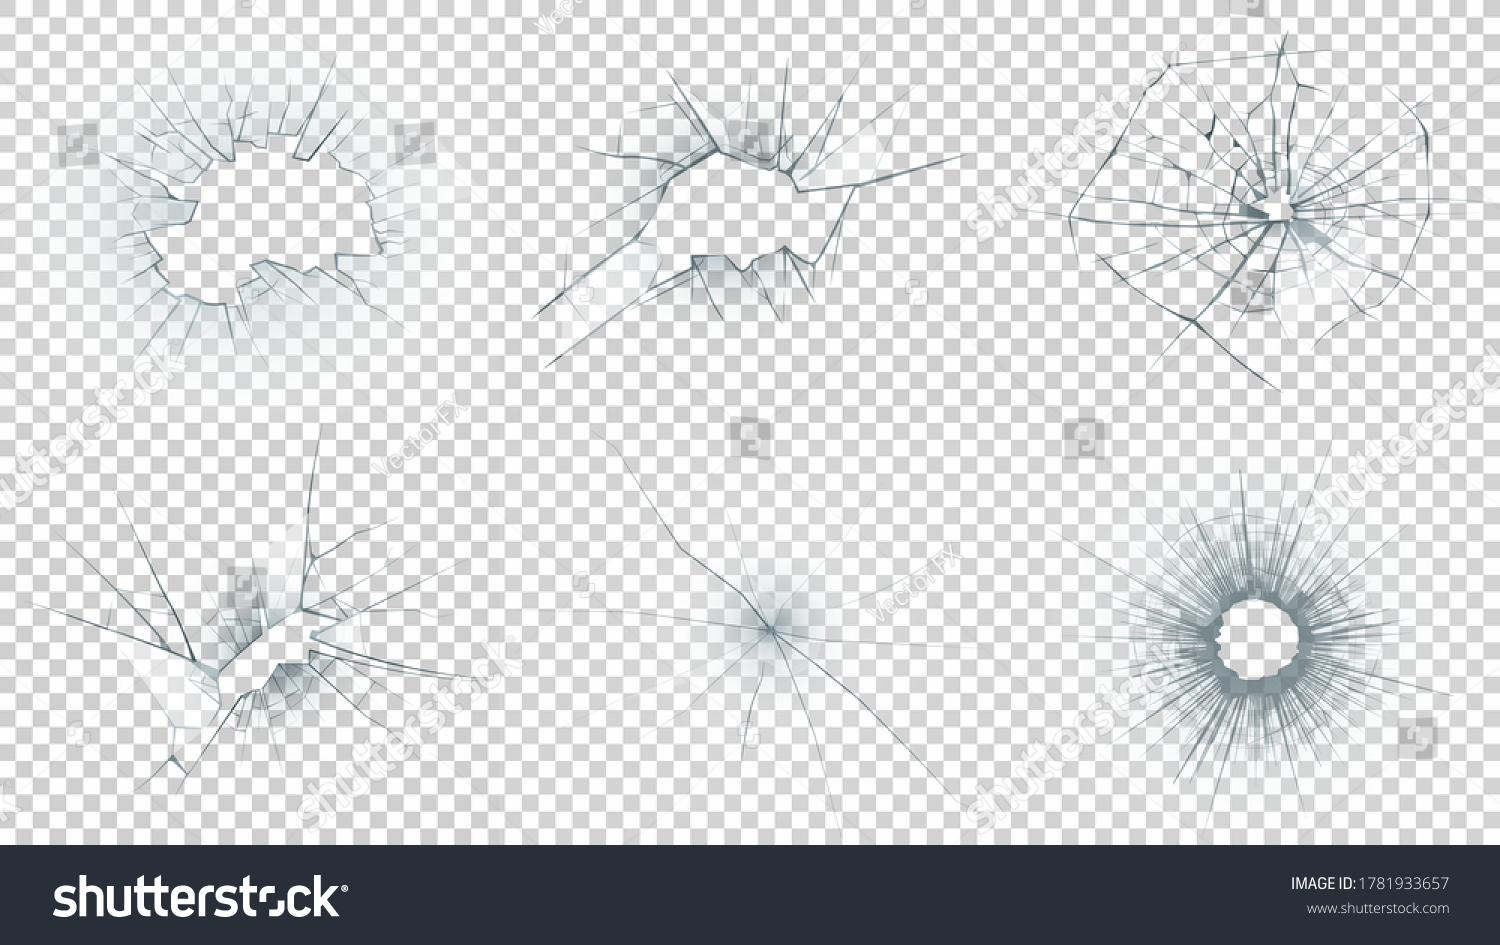 SVG of Broken glass. Set of vector illustrations with transparent background. Cracked surface contour for shattering effect. Broken objects and holes. Cracked and destroyed backgrounds for texture mapping. svg